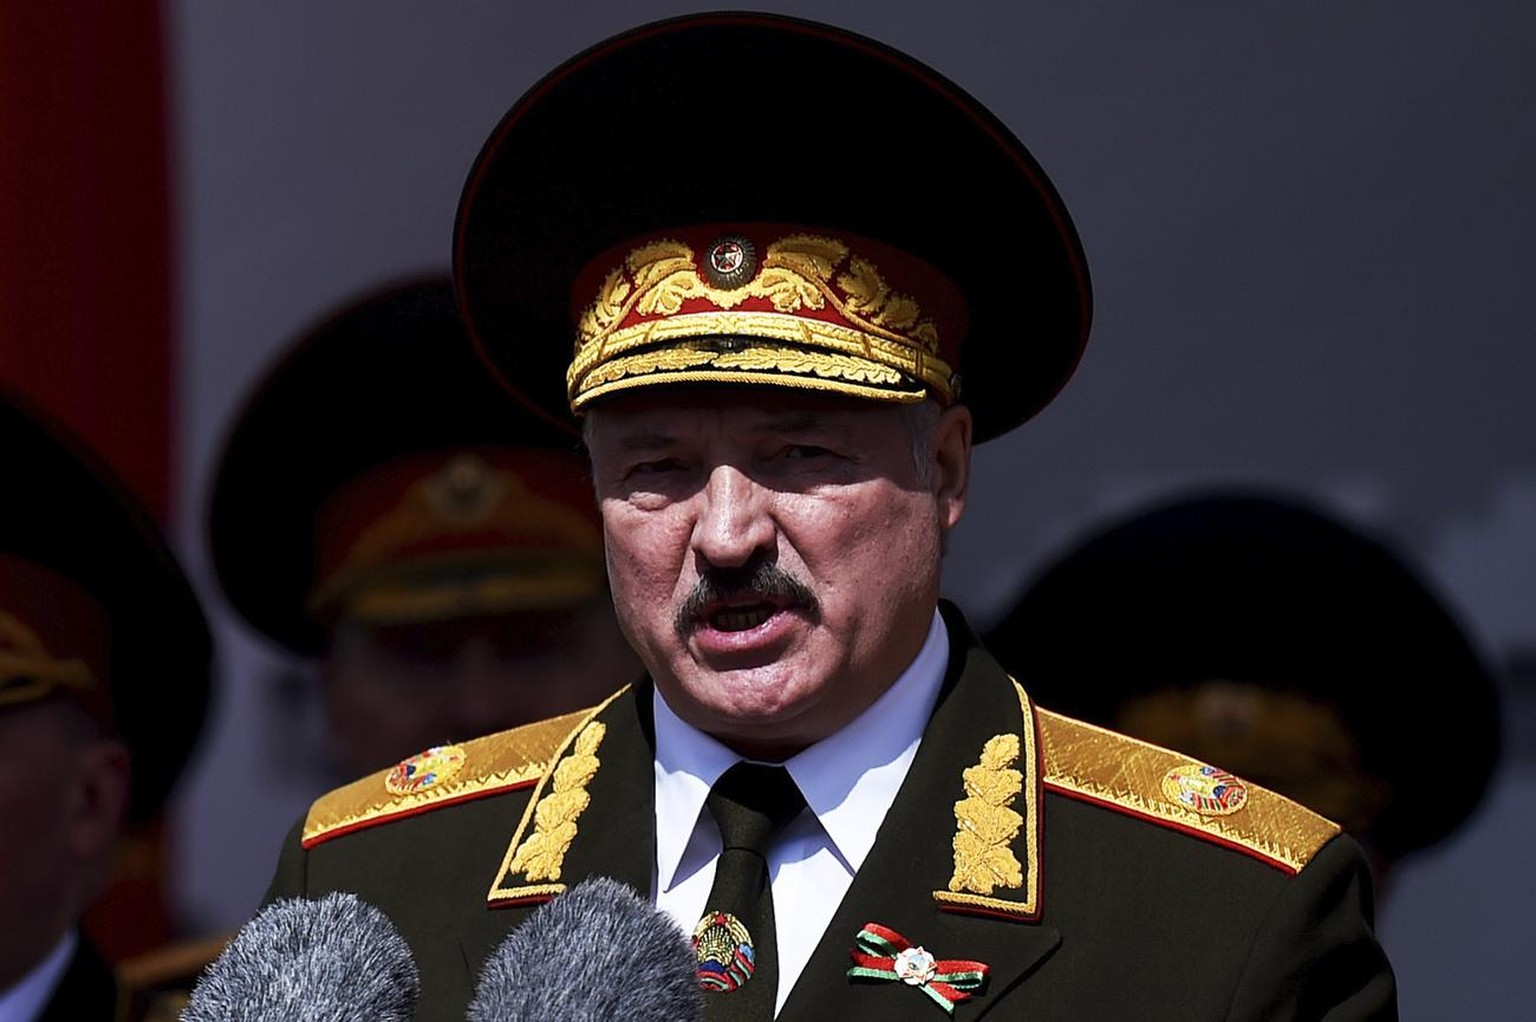 FILE - In this Saturday, May 9, 2020 file photo, Belarusian President Alexander Lukashenko gives a speech during a military parade that marked the 75th anniversary of the allied victory over Nazi Germ ...